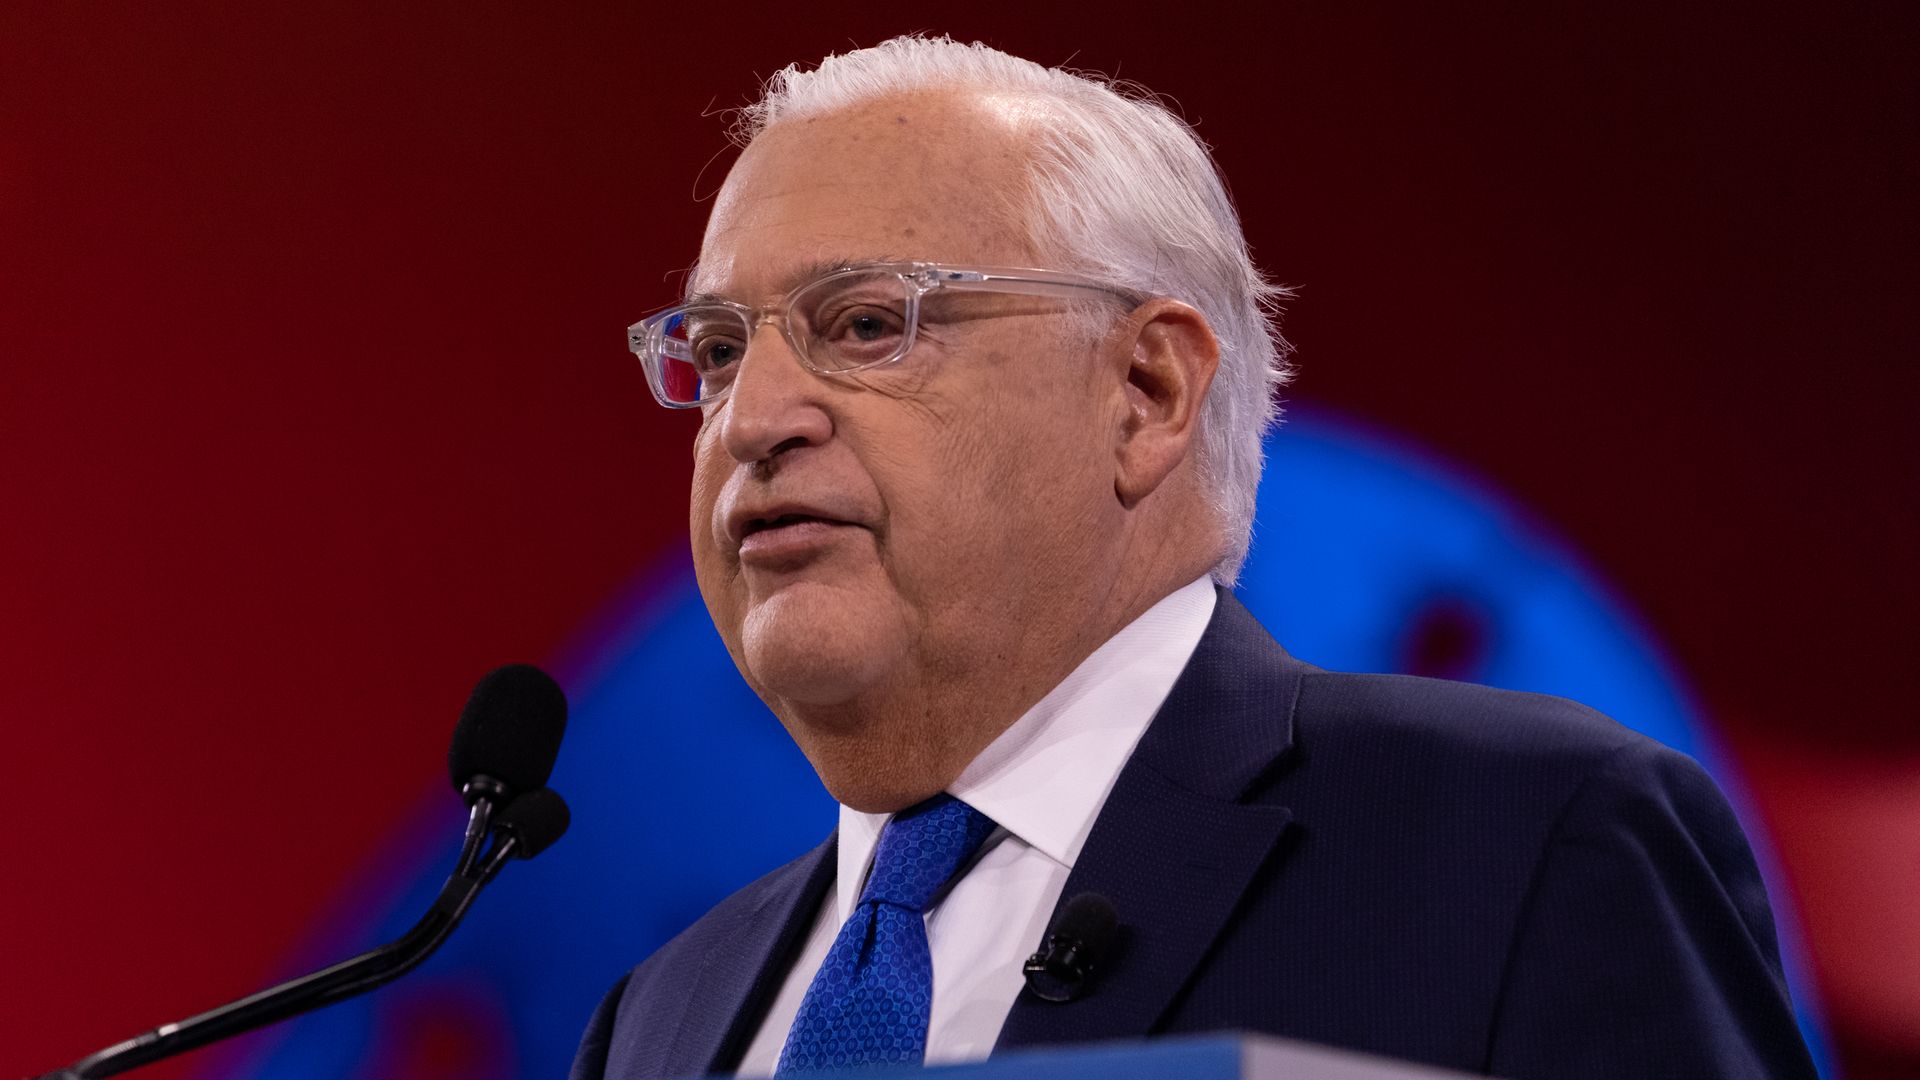 In this image, David Friedman faces the left and speaks, wearing glasses.